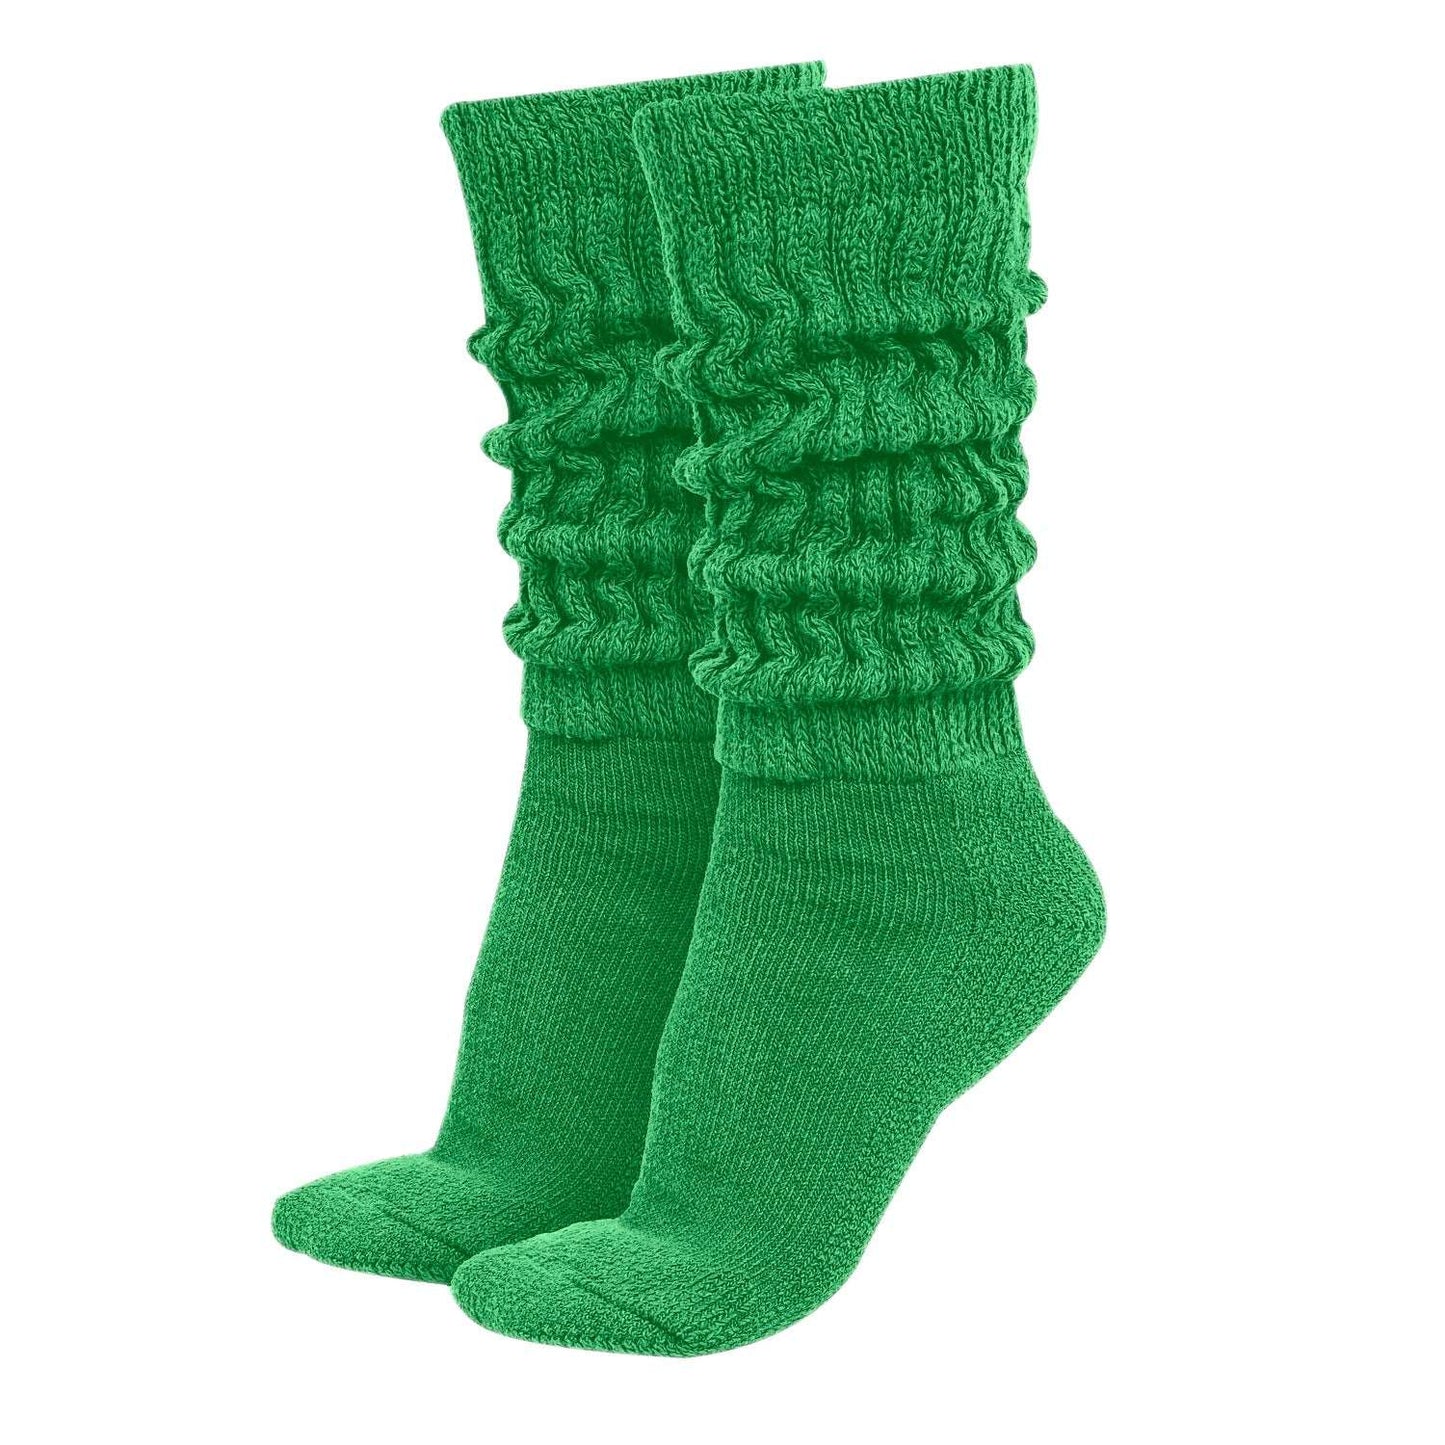 Wholesale MDR Distributors Women's Extra Long & Heavy Slouch Cotton Wear at any Length Socks Made in USA 1 Pair Size 9 to 11 Minimum Purchase 60 pieces